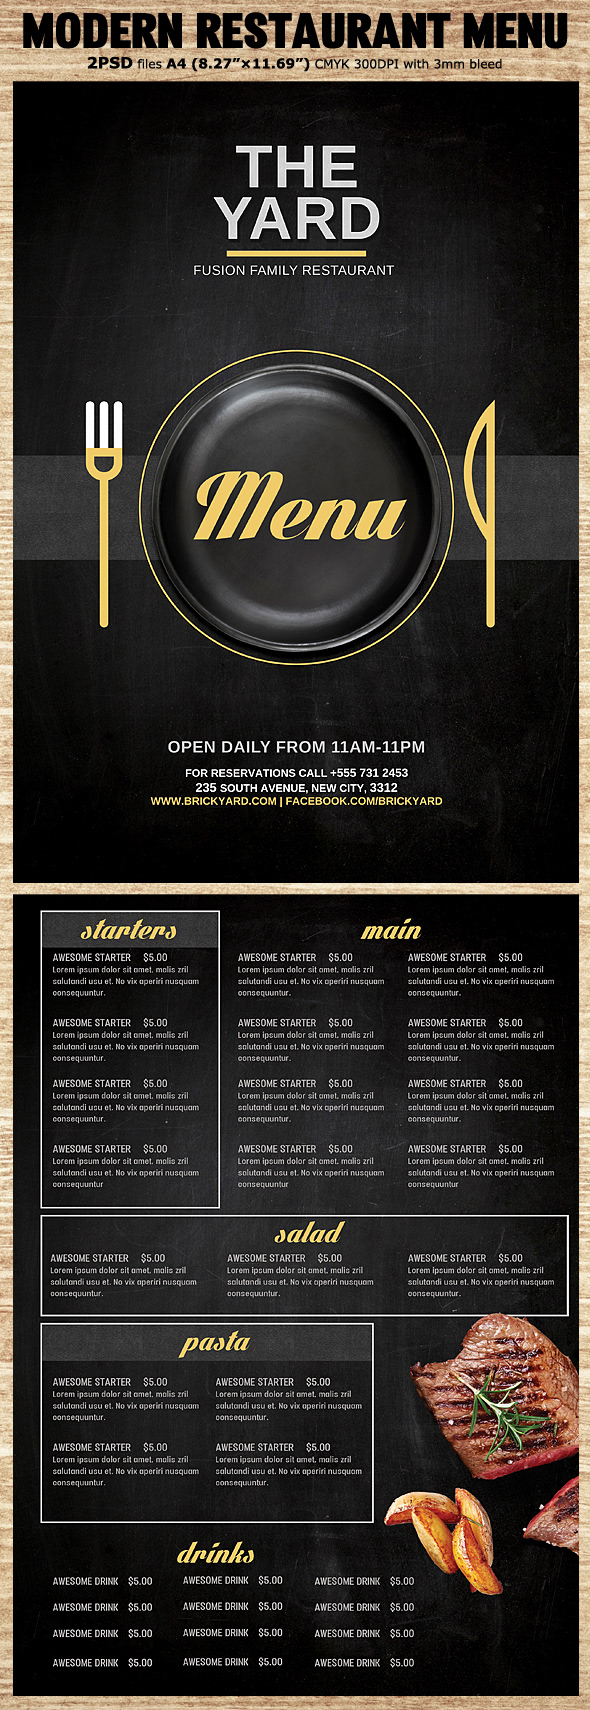 Christos Andronicou - Modern Restaurant Food Menu Flyer Template Within Modern Restaurant Food Menu Flyer Template With Modern Restaurant Food Menu Flyer Template